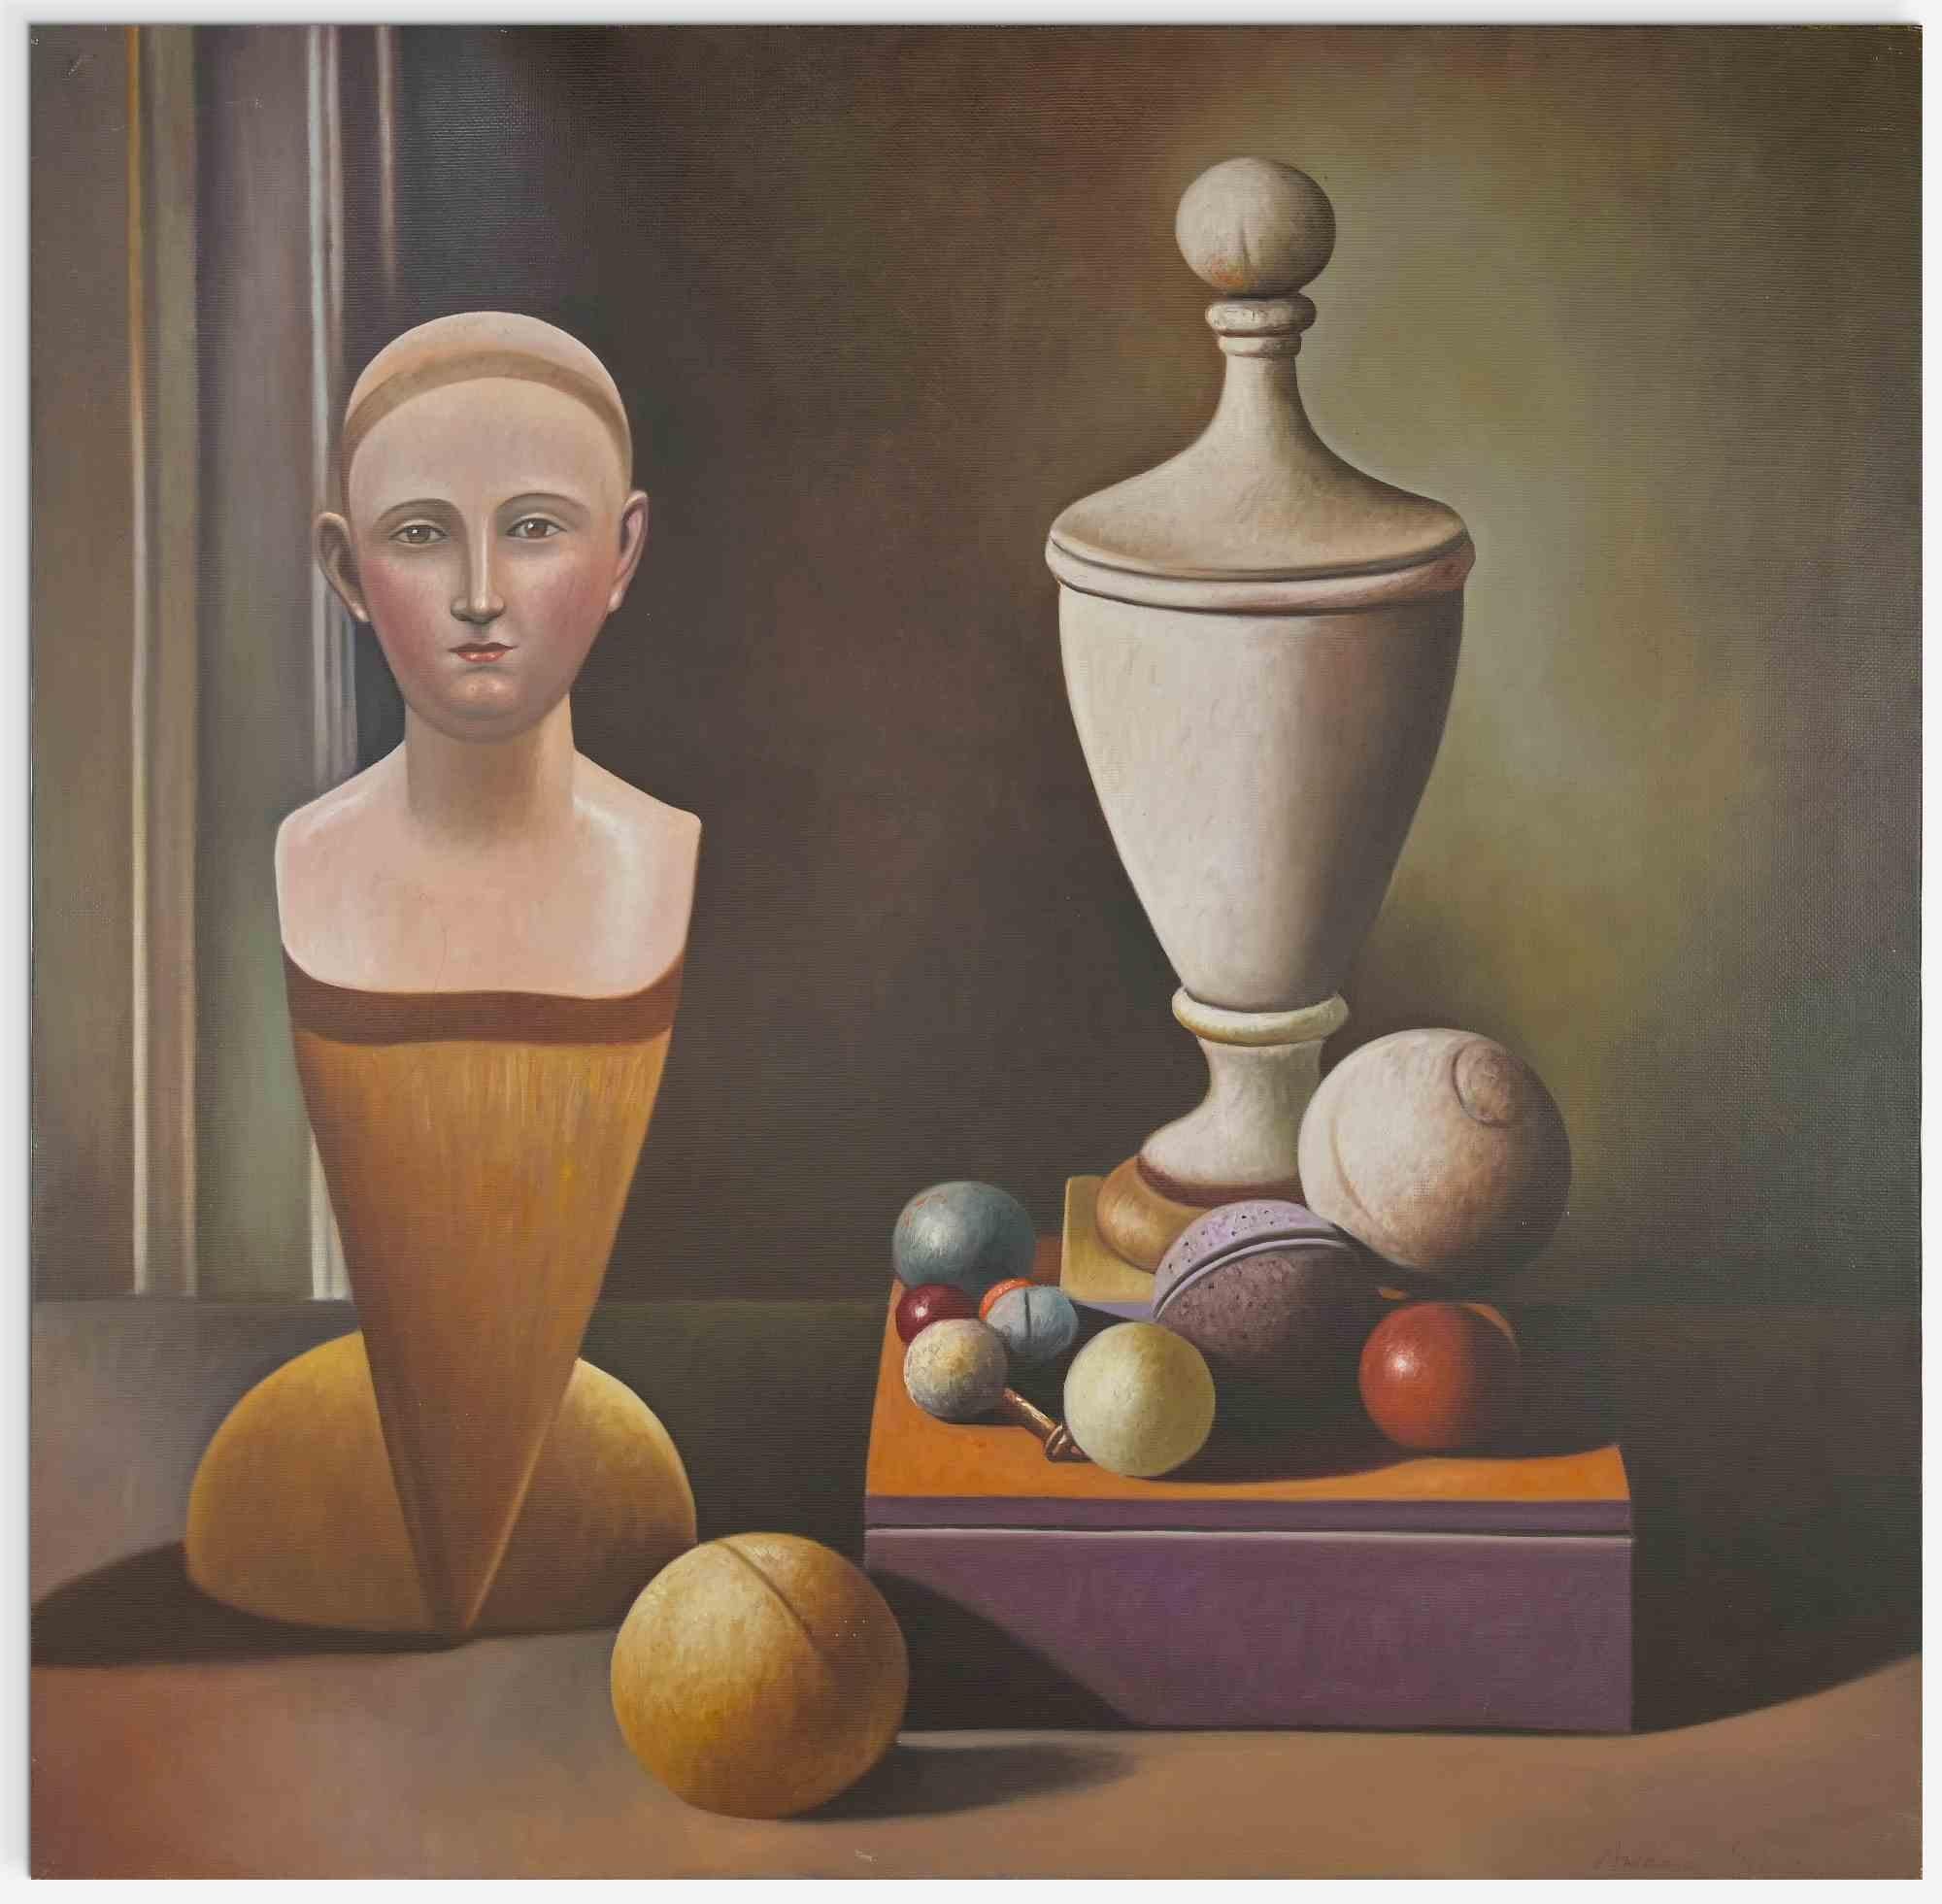 Still life of spheres and wood sculpture is an oil painting on canvas made by Antonio Sciacca ( Catania 1957). 

100x98 cm.

Handsigned on the lower right and on the back.

Good conditions. 

Antonio Sciacca was born in Catania, where he completed